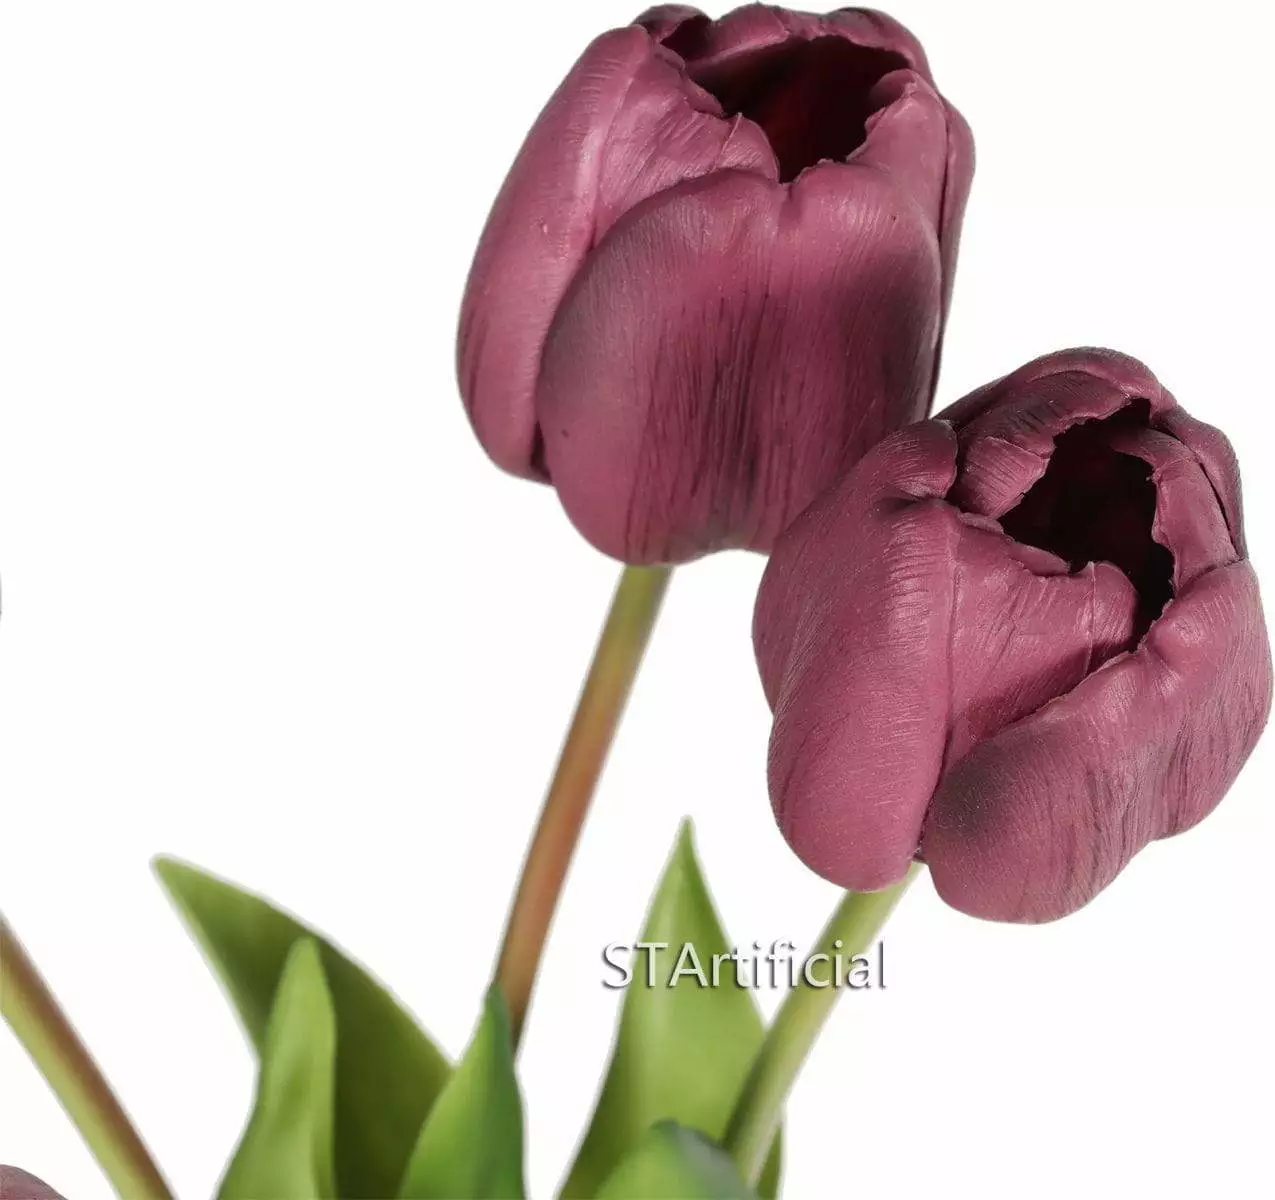 Tulips with 2 Buds